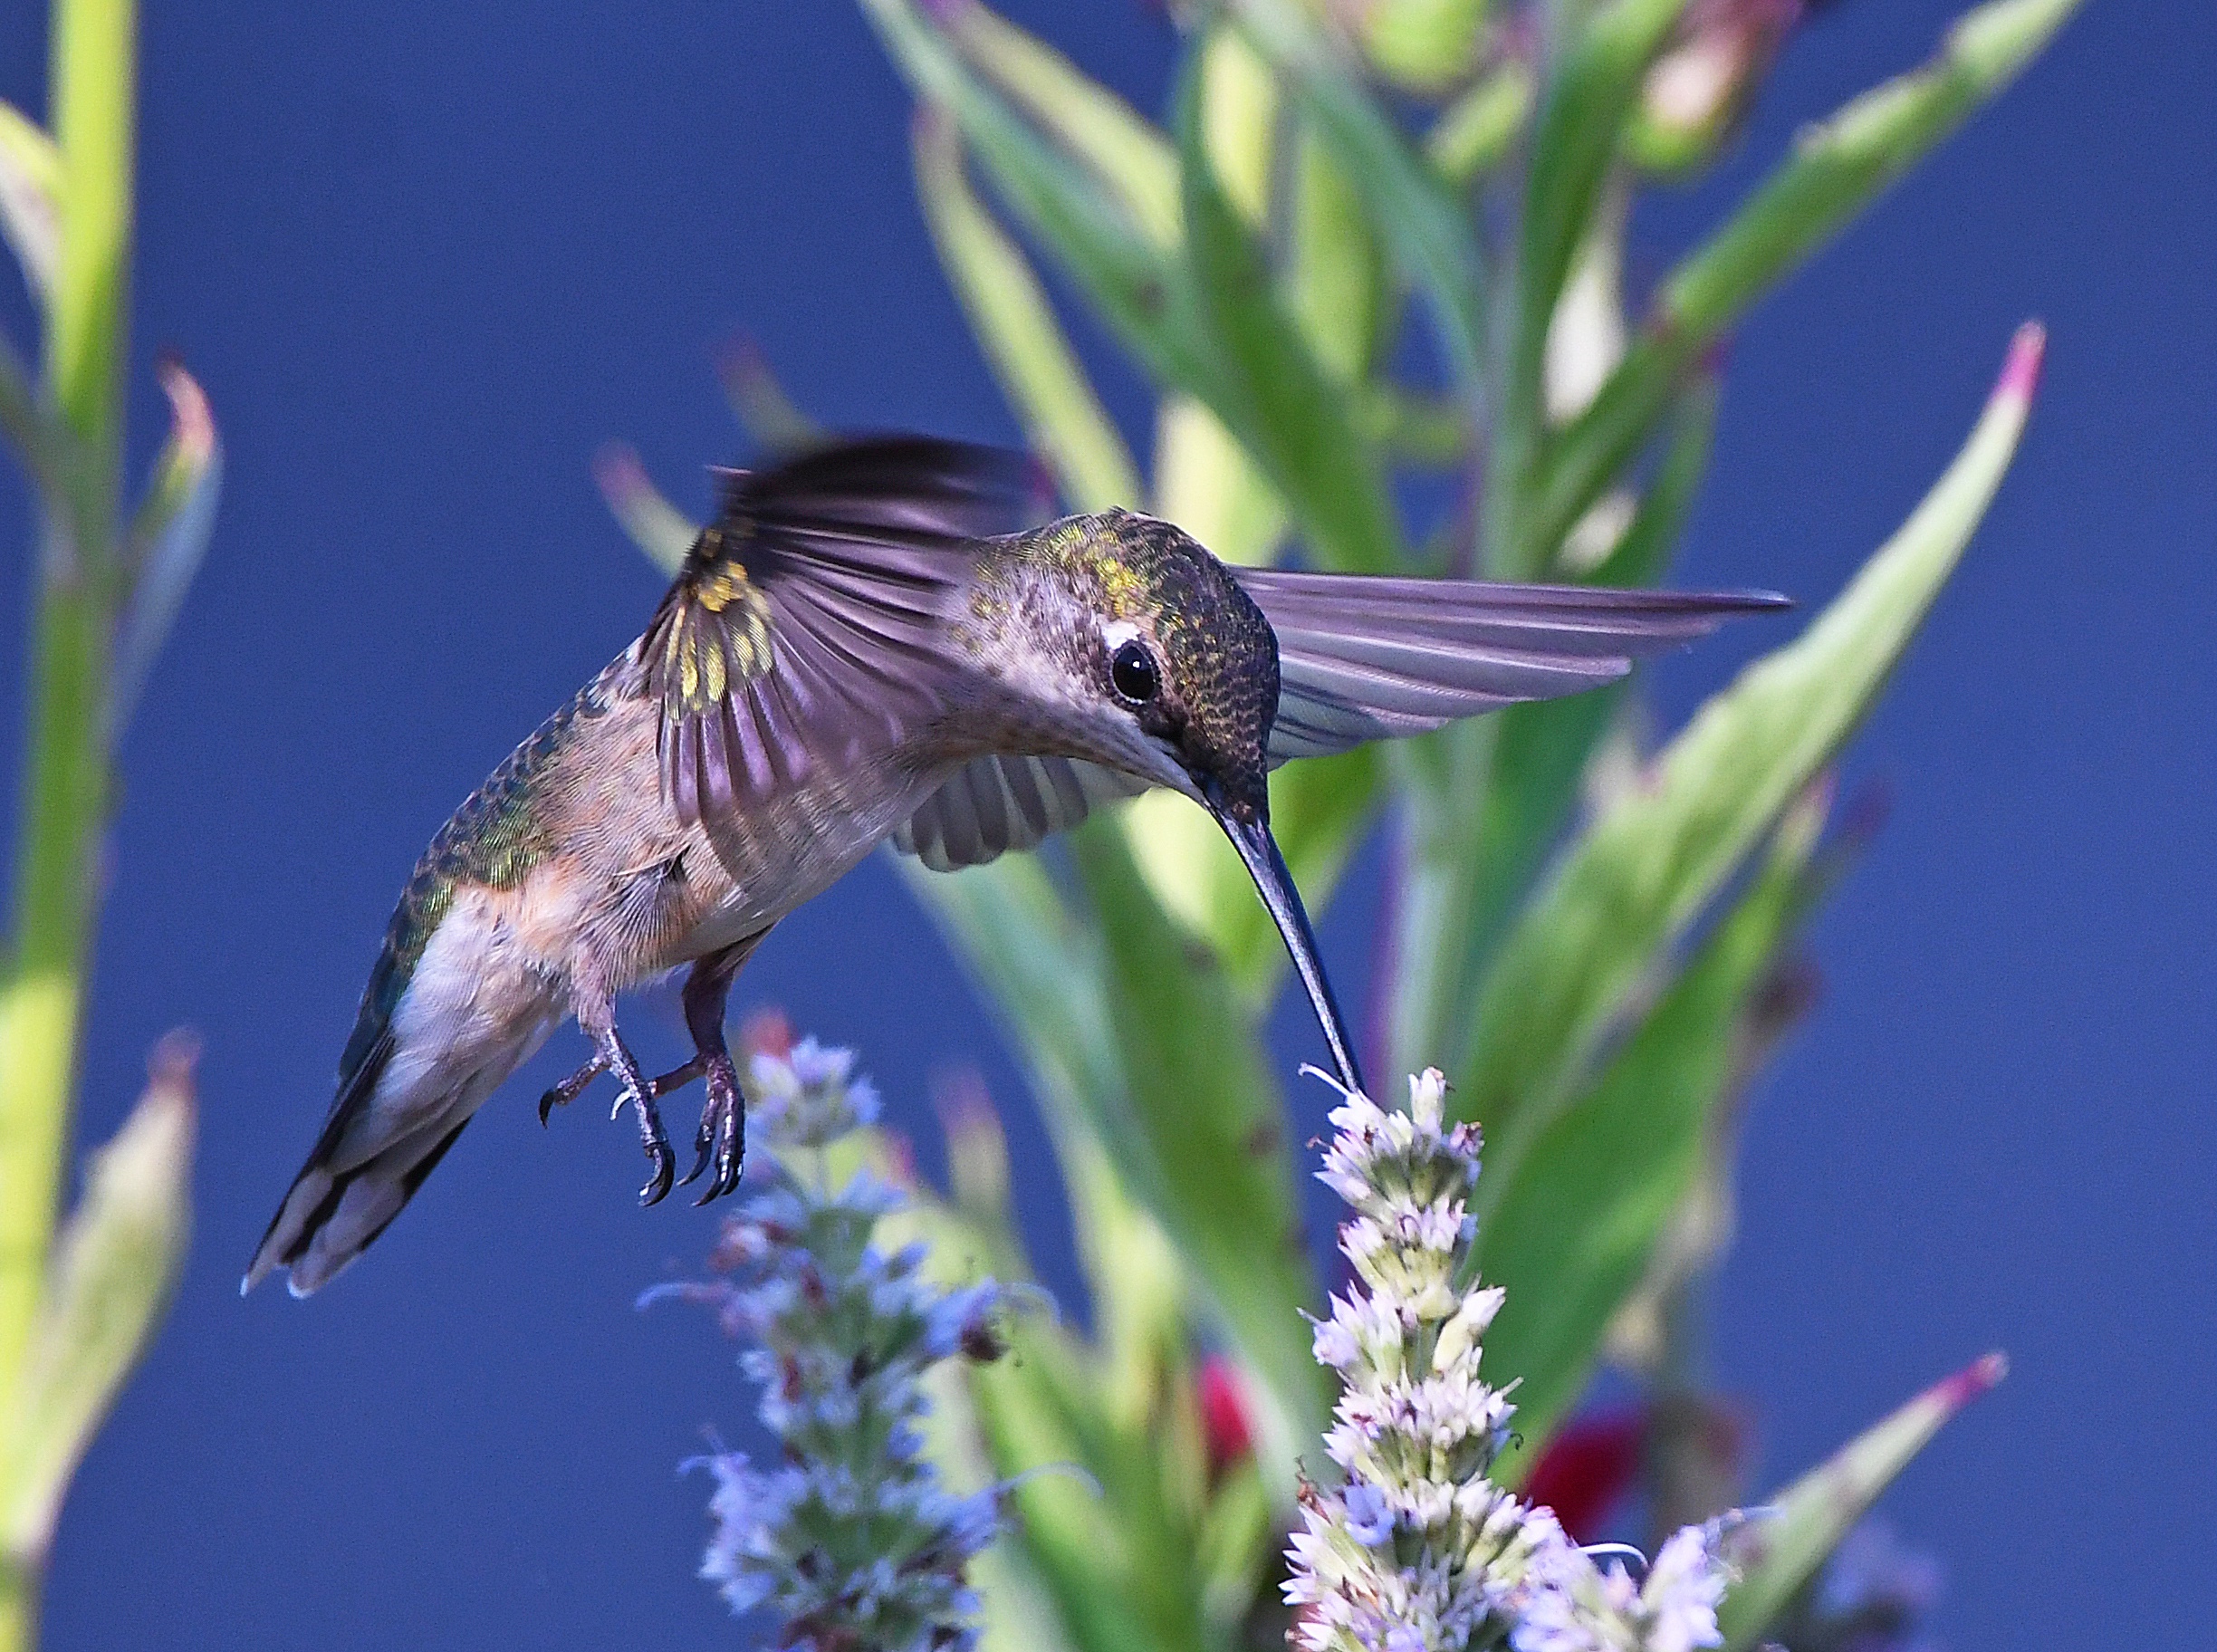 A hummingbird hovers next to a flower, beak extended into its petals.